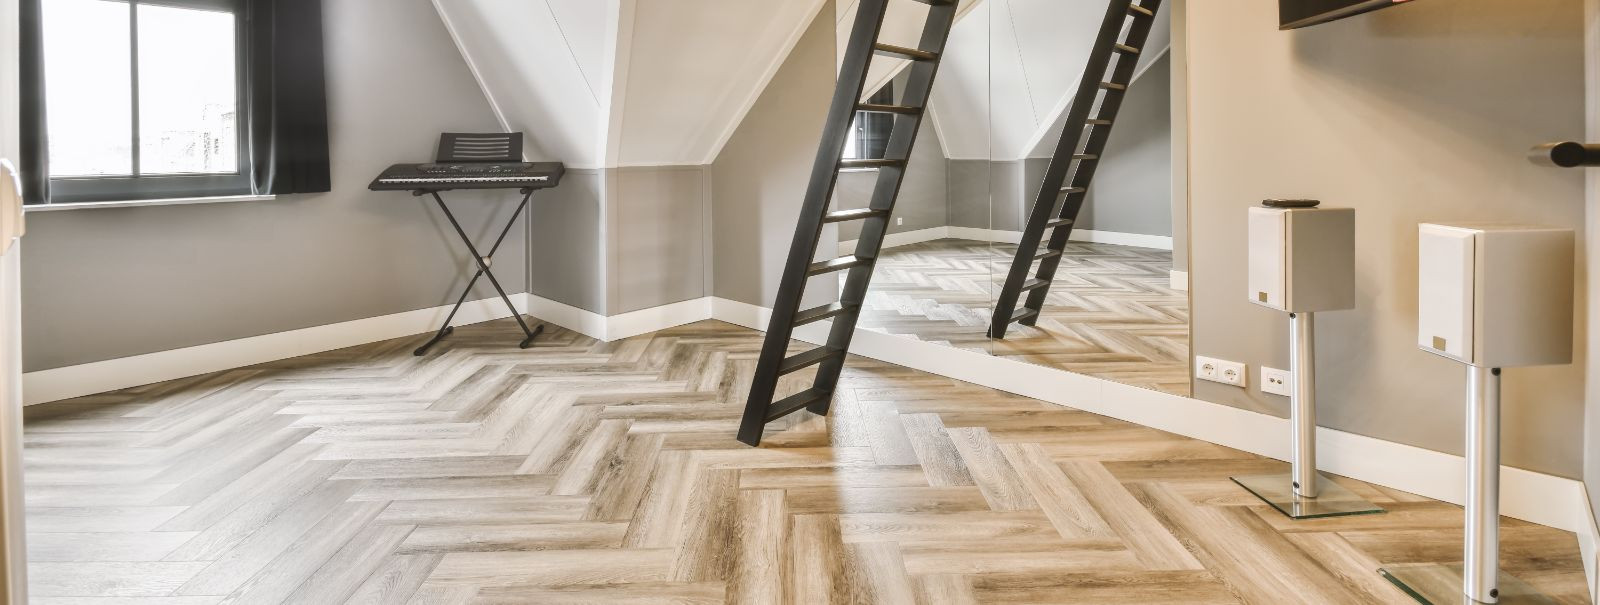 Laminate flooring is a popular choice for many homeowners and commercial property managers due to its durability, ease of installation, and aesthetic appeal. Ho